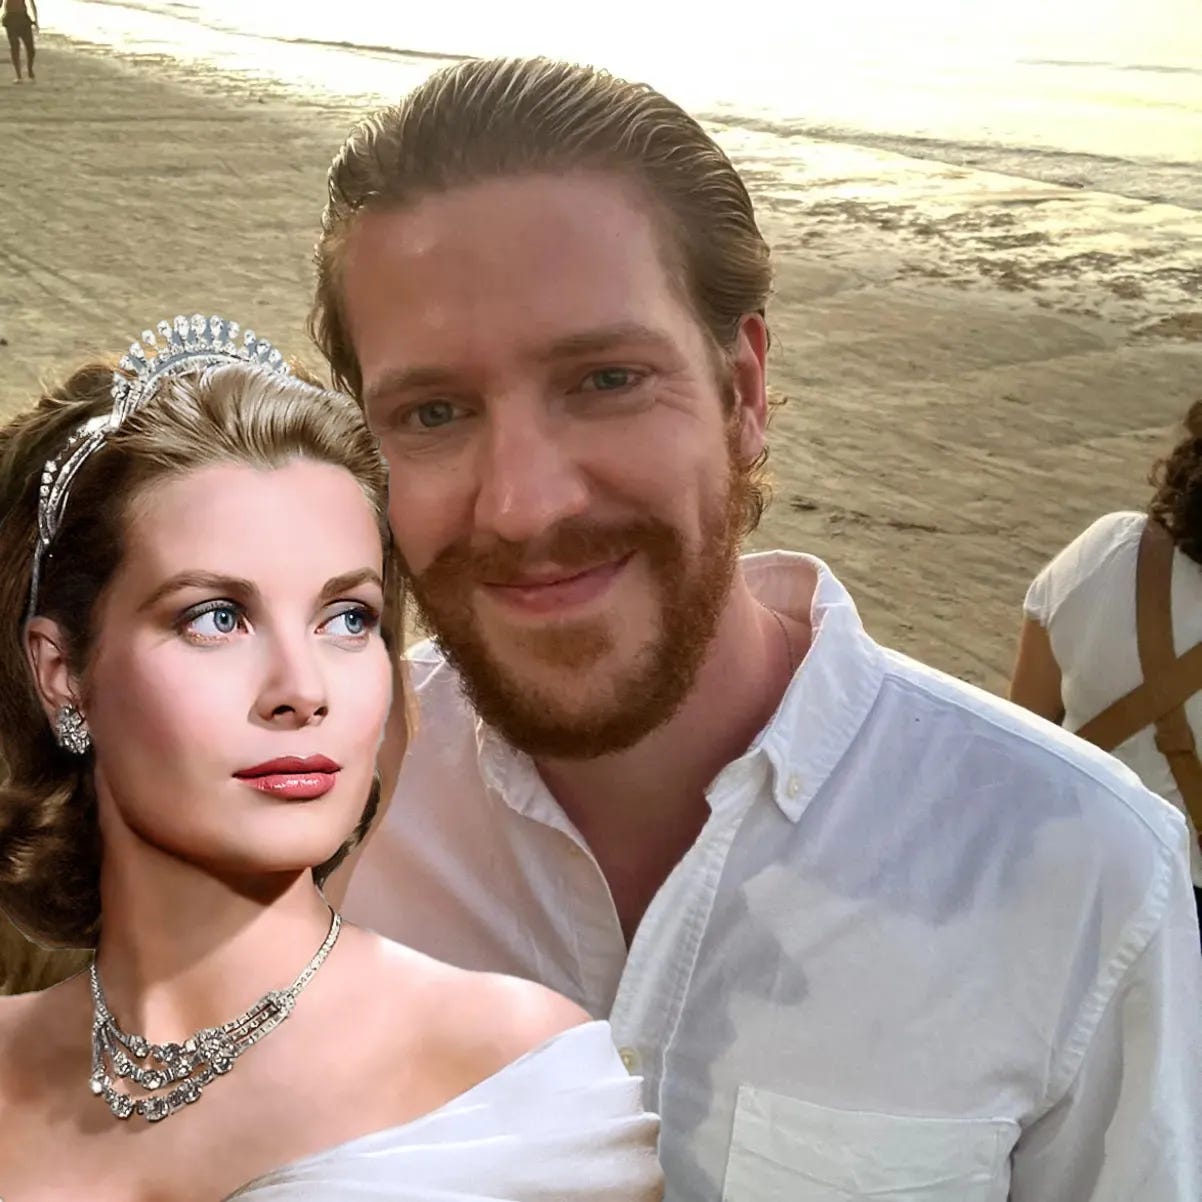 An image of Grace Kelly wearing a tiara superimposed into a picture of a white bearded man wearing a white shirt at the beach